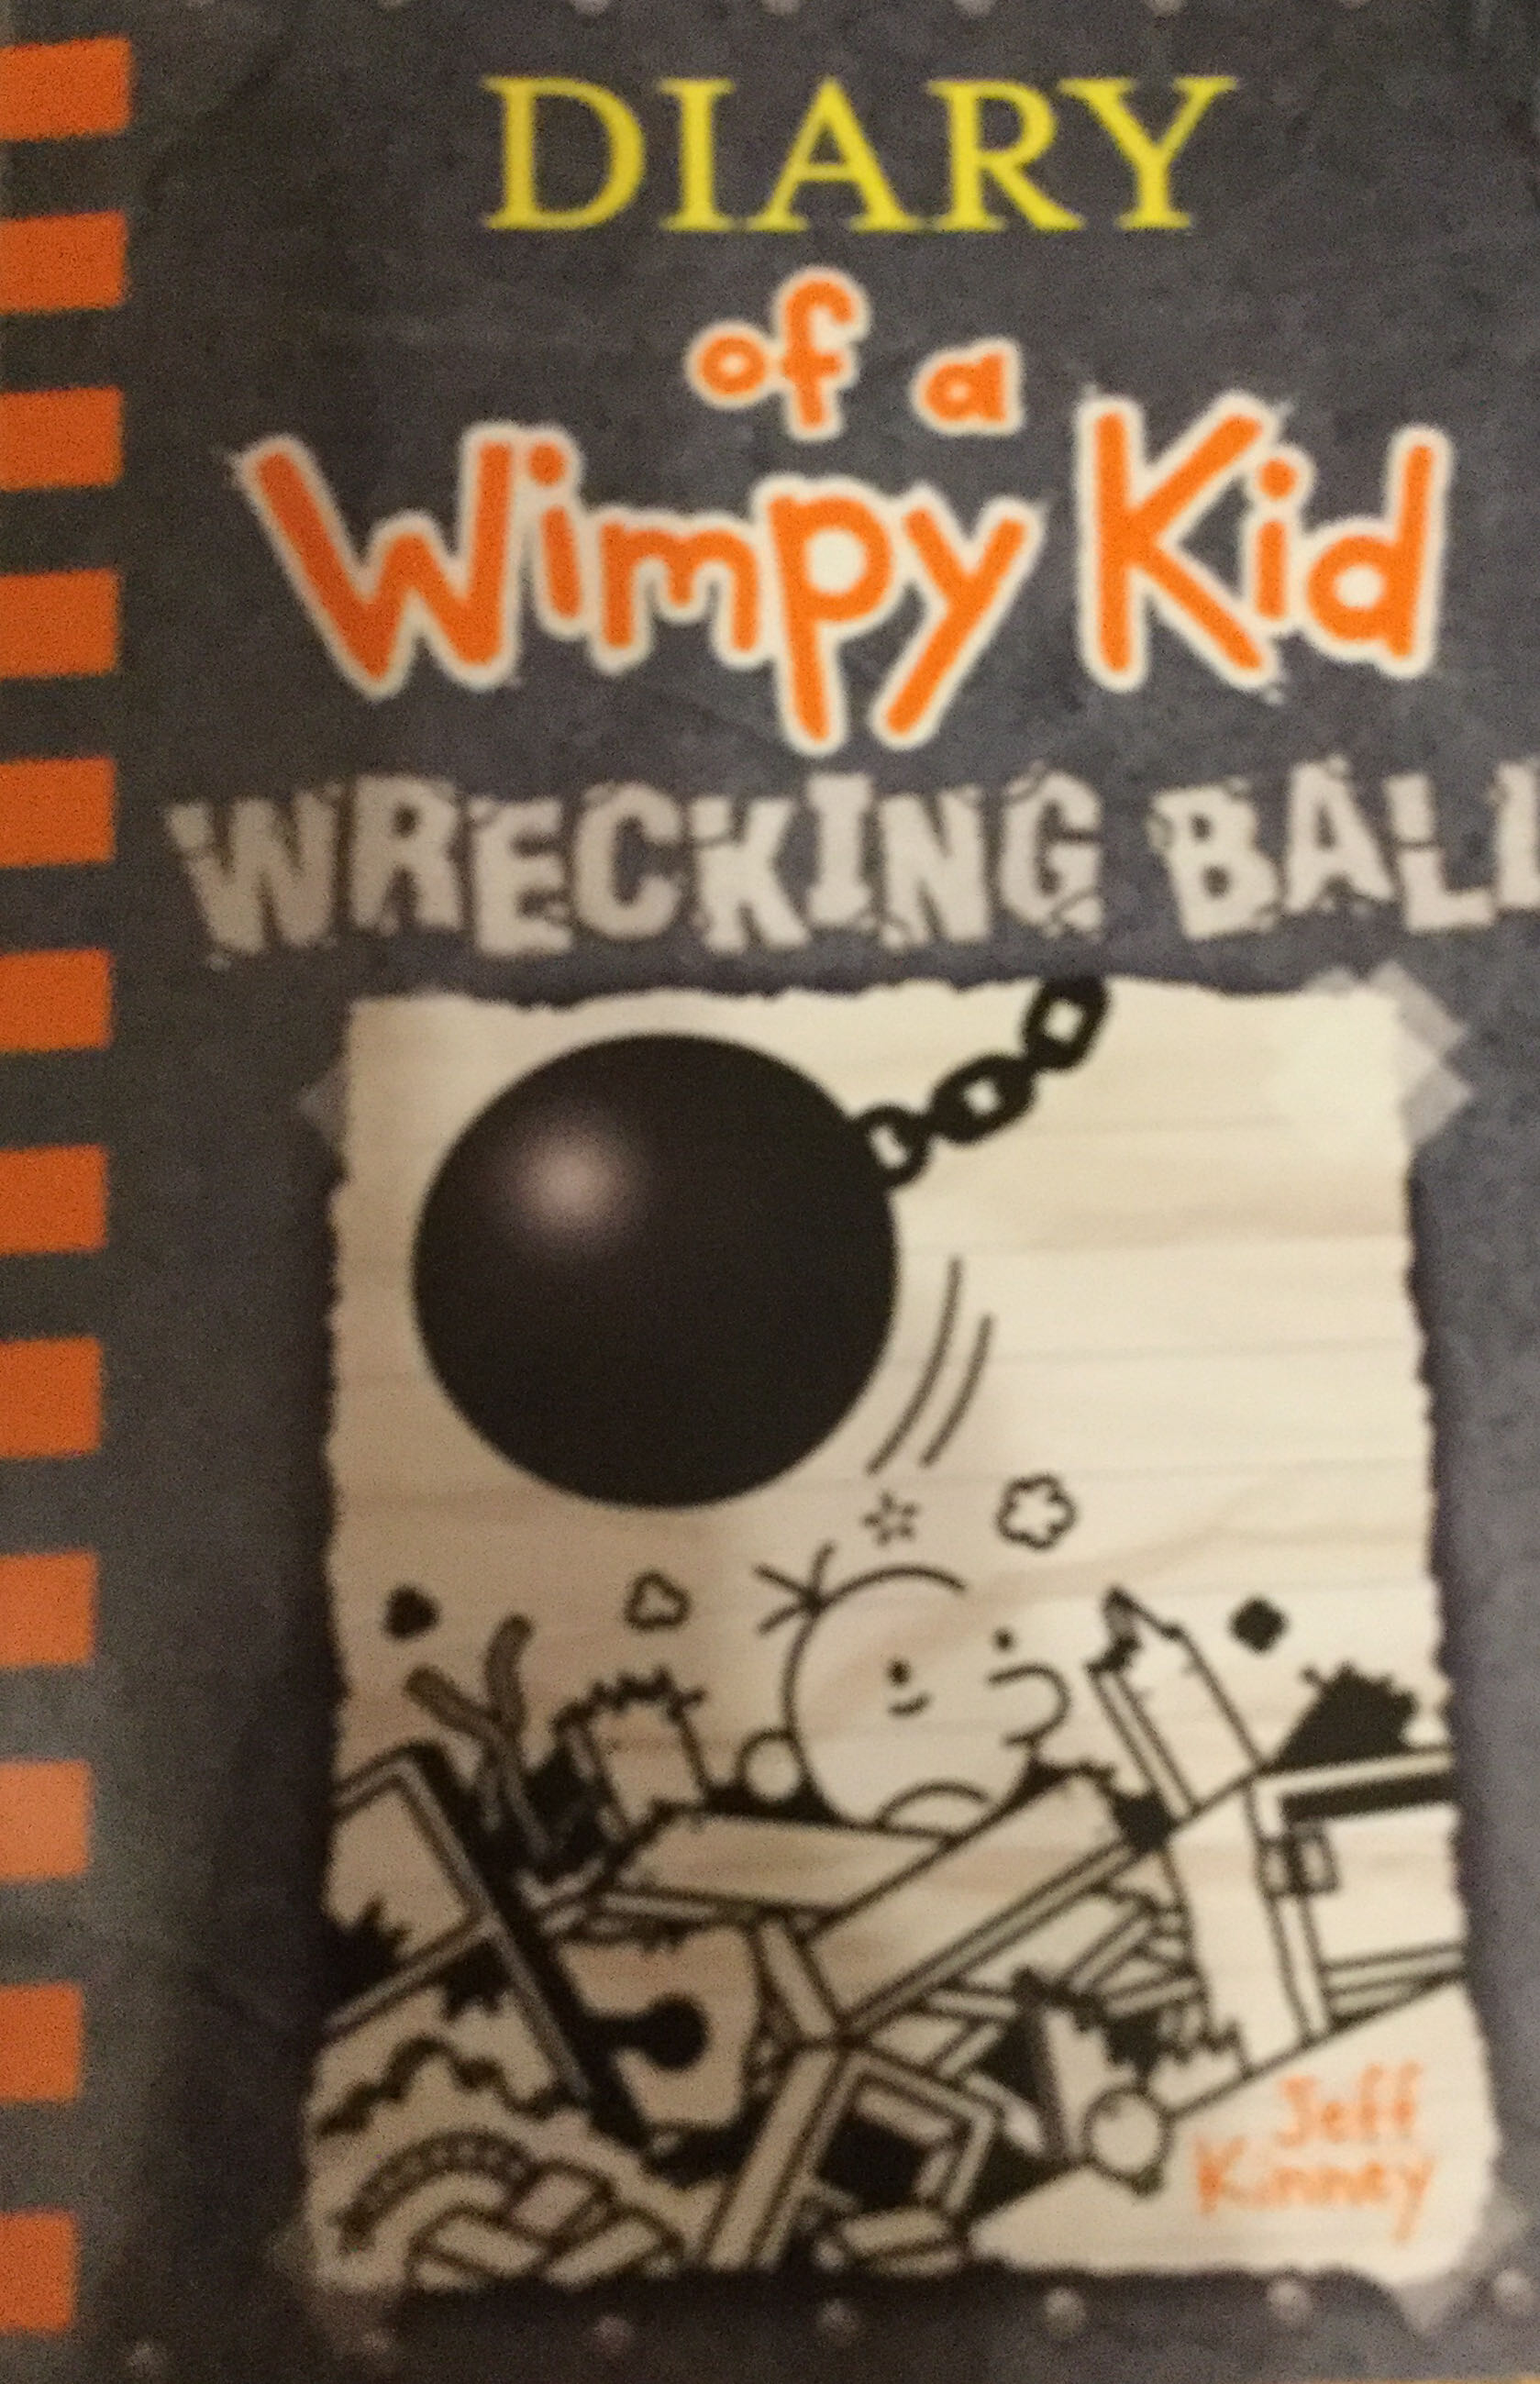 Diary of a Wimpy Kid #14 Wrecking Ball - Jeff Kinney (Amulet Books - Hardcover) book collectible [Barcode 9781419744211] - Main Image 1